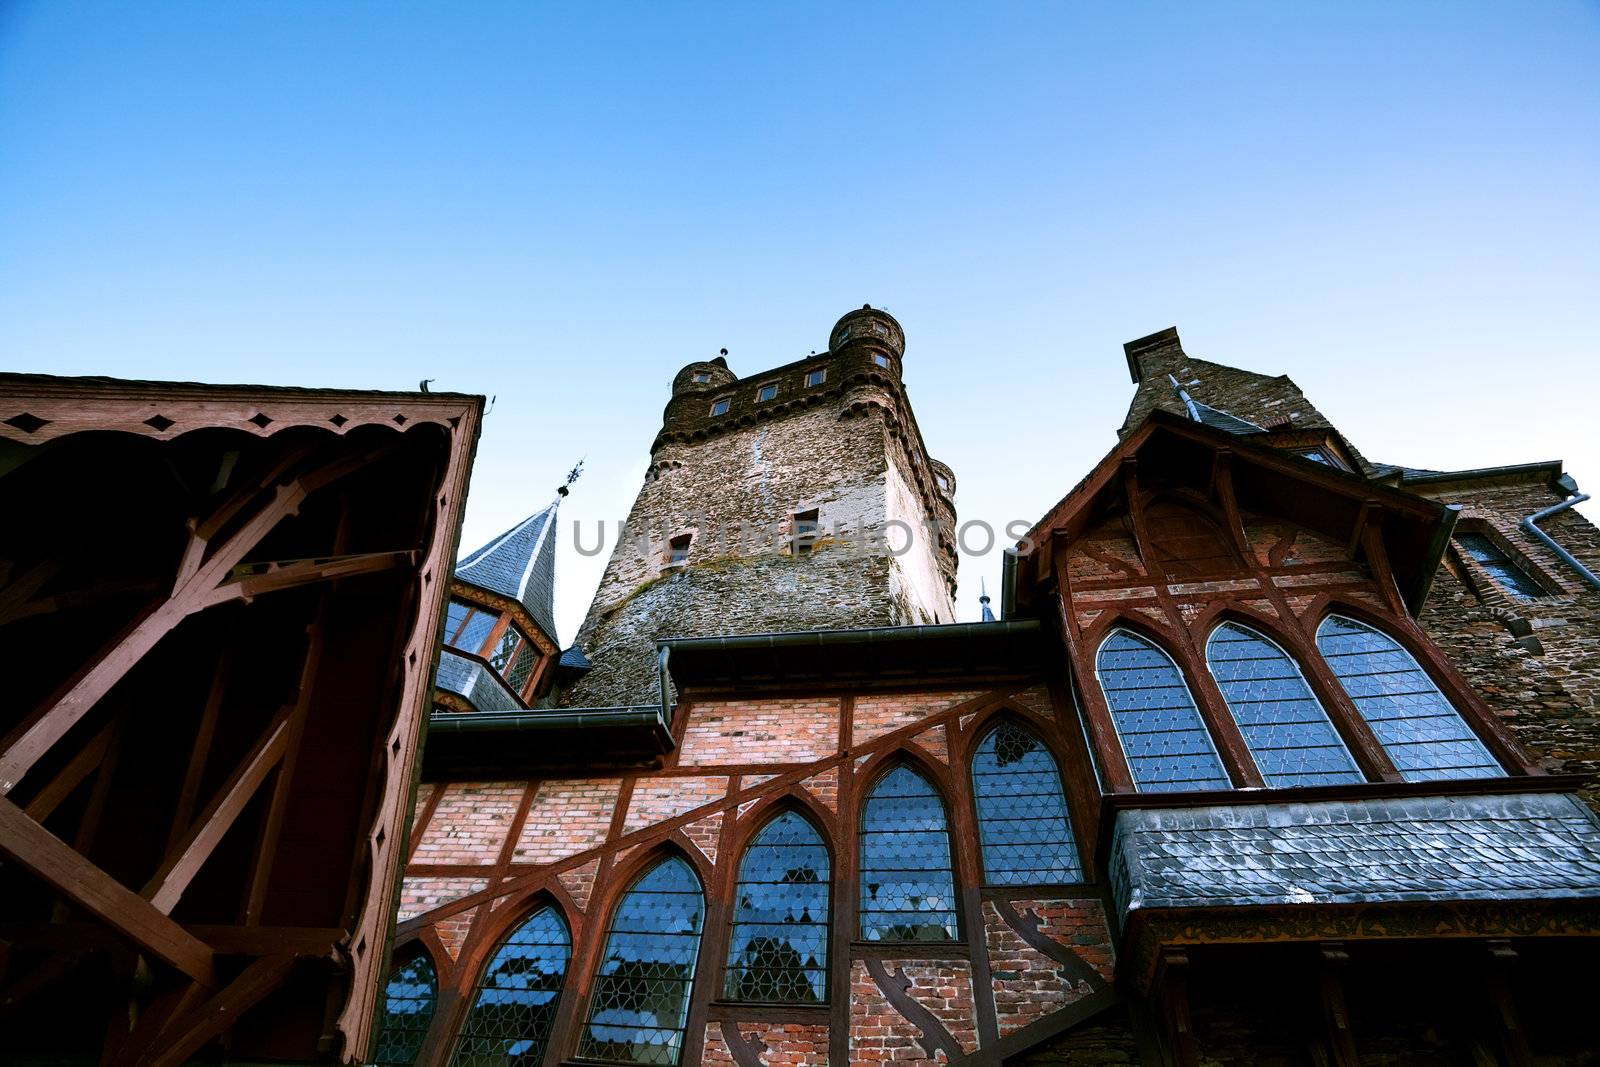 fragment of architecture of castle in Cochem, Germany, over blue sky